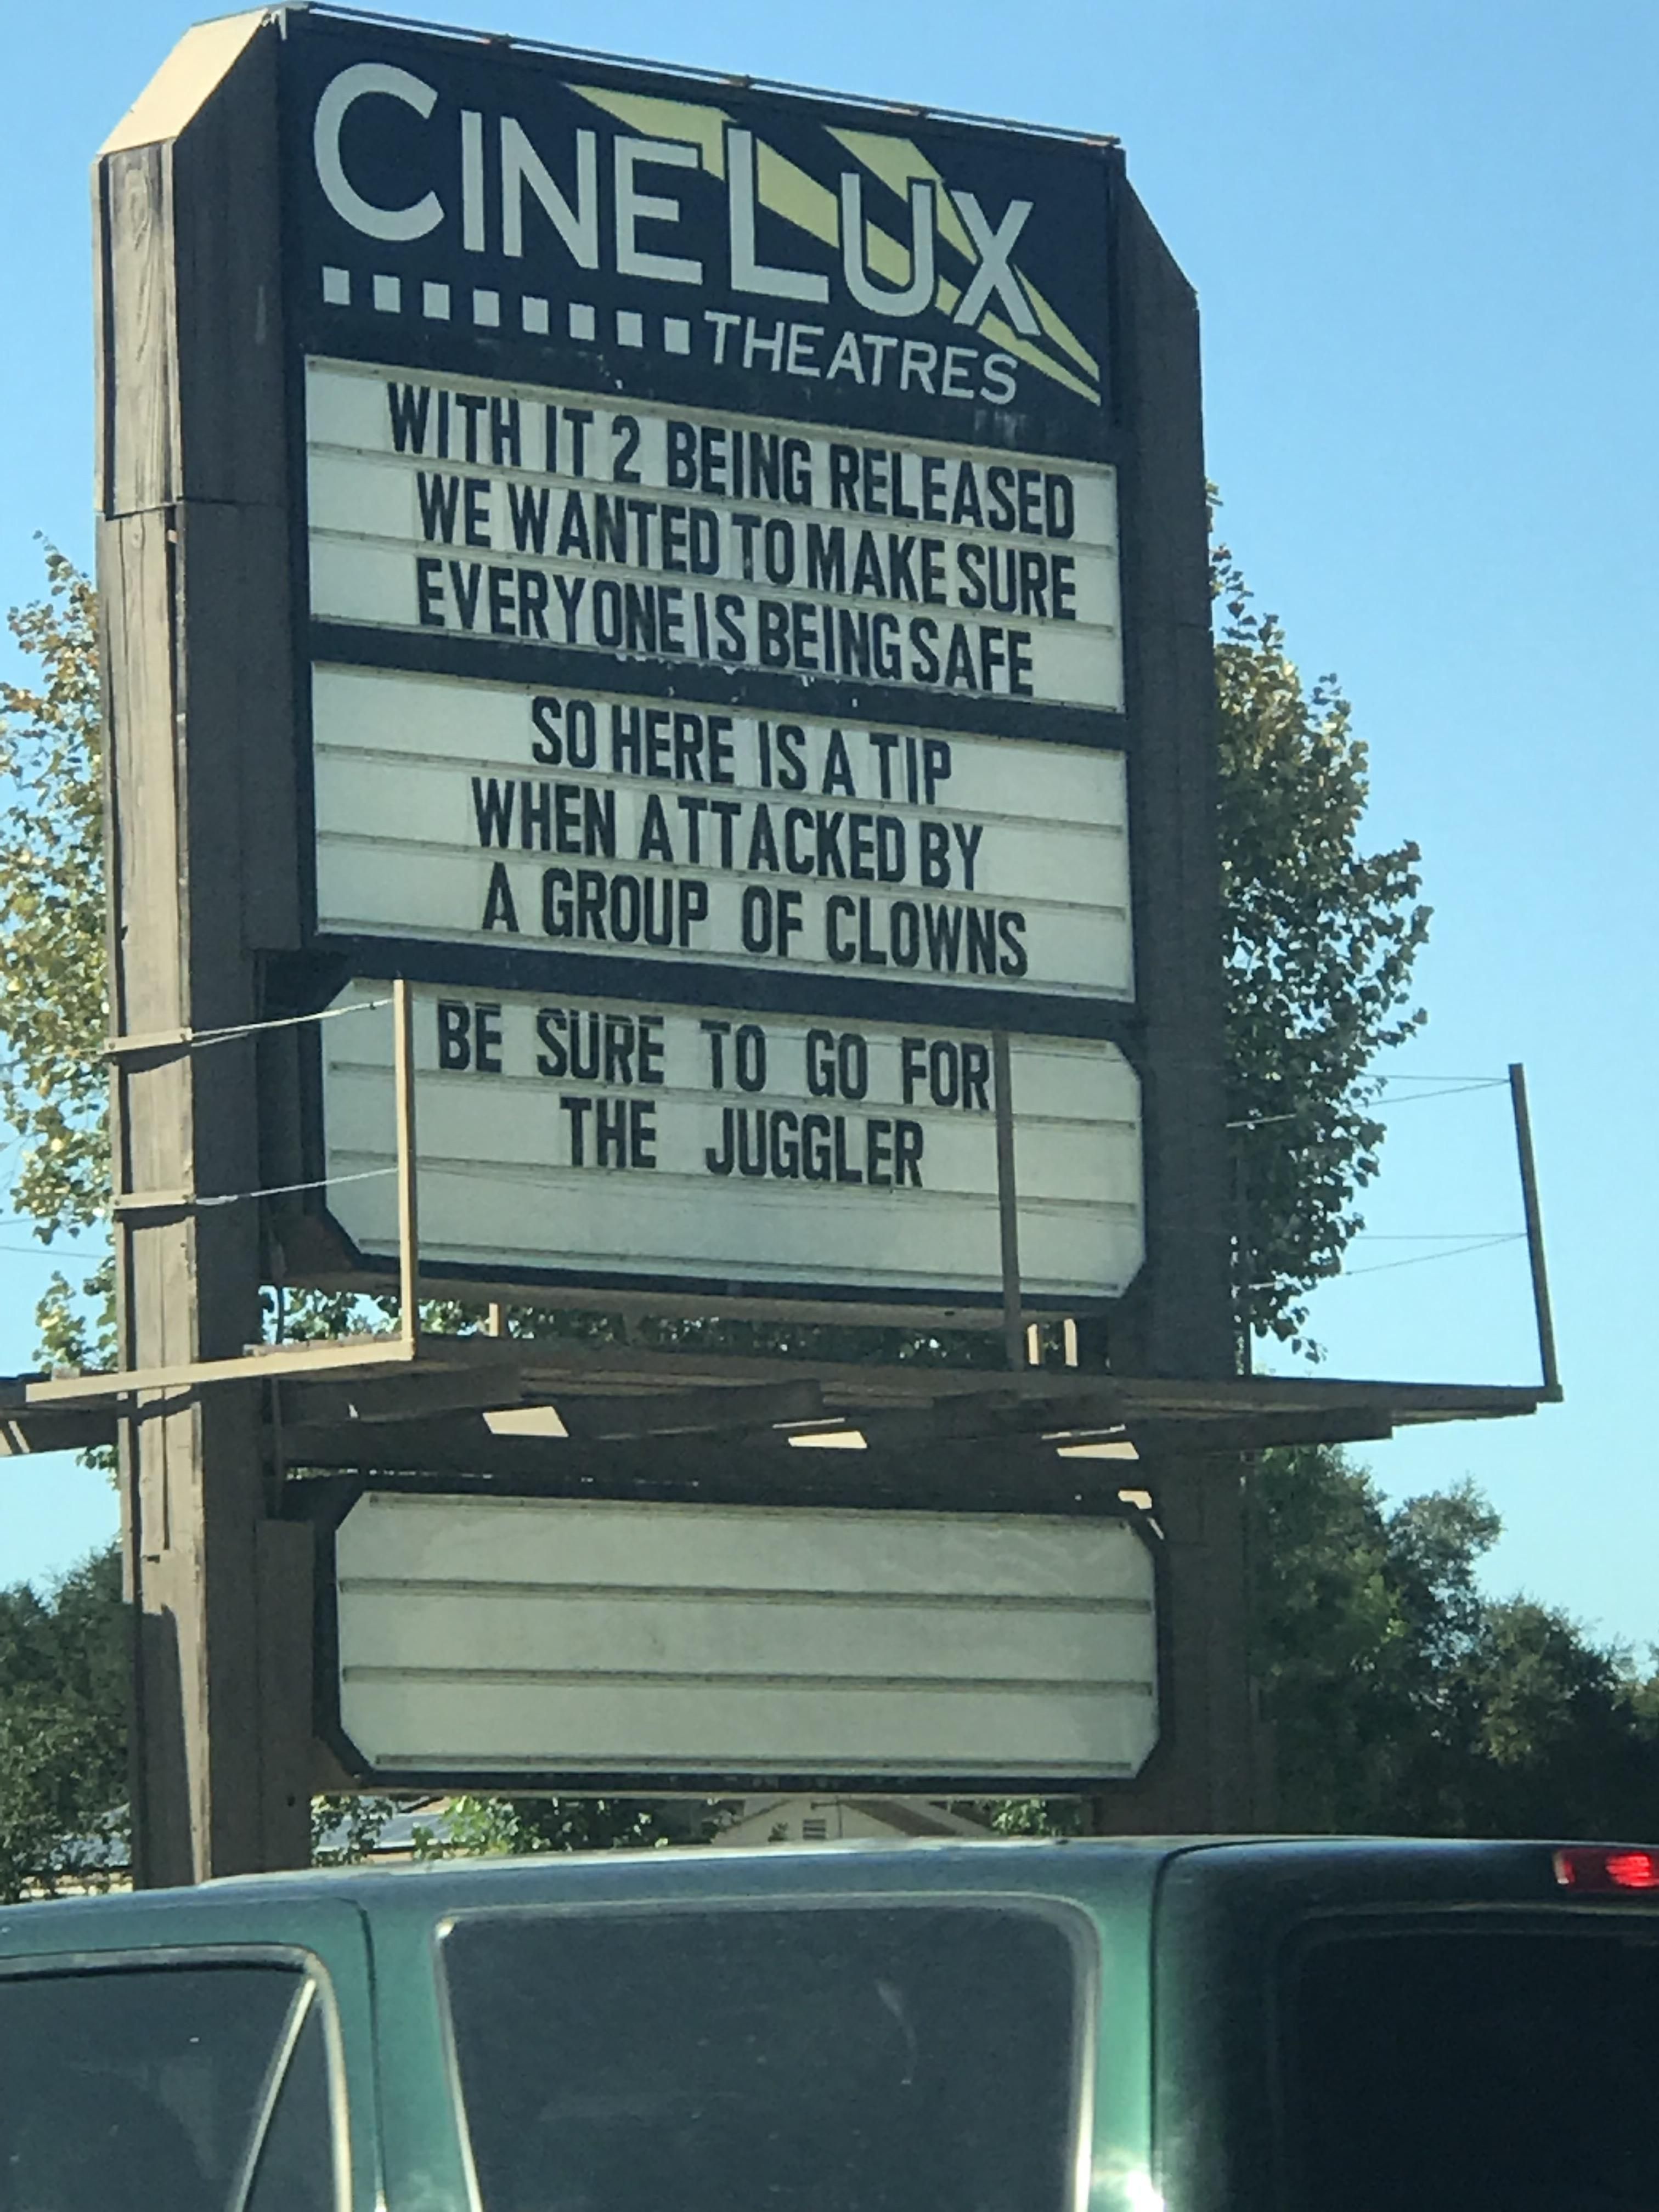 My local movie theater thinks they’re hilarious